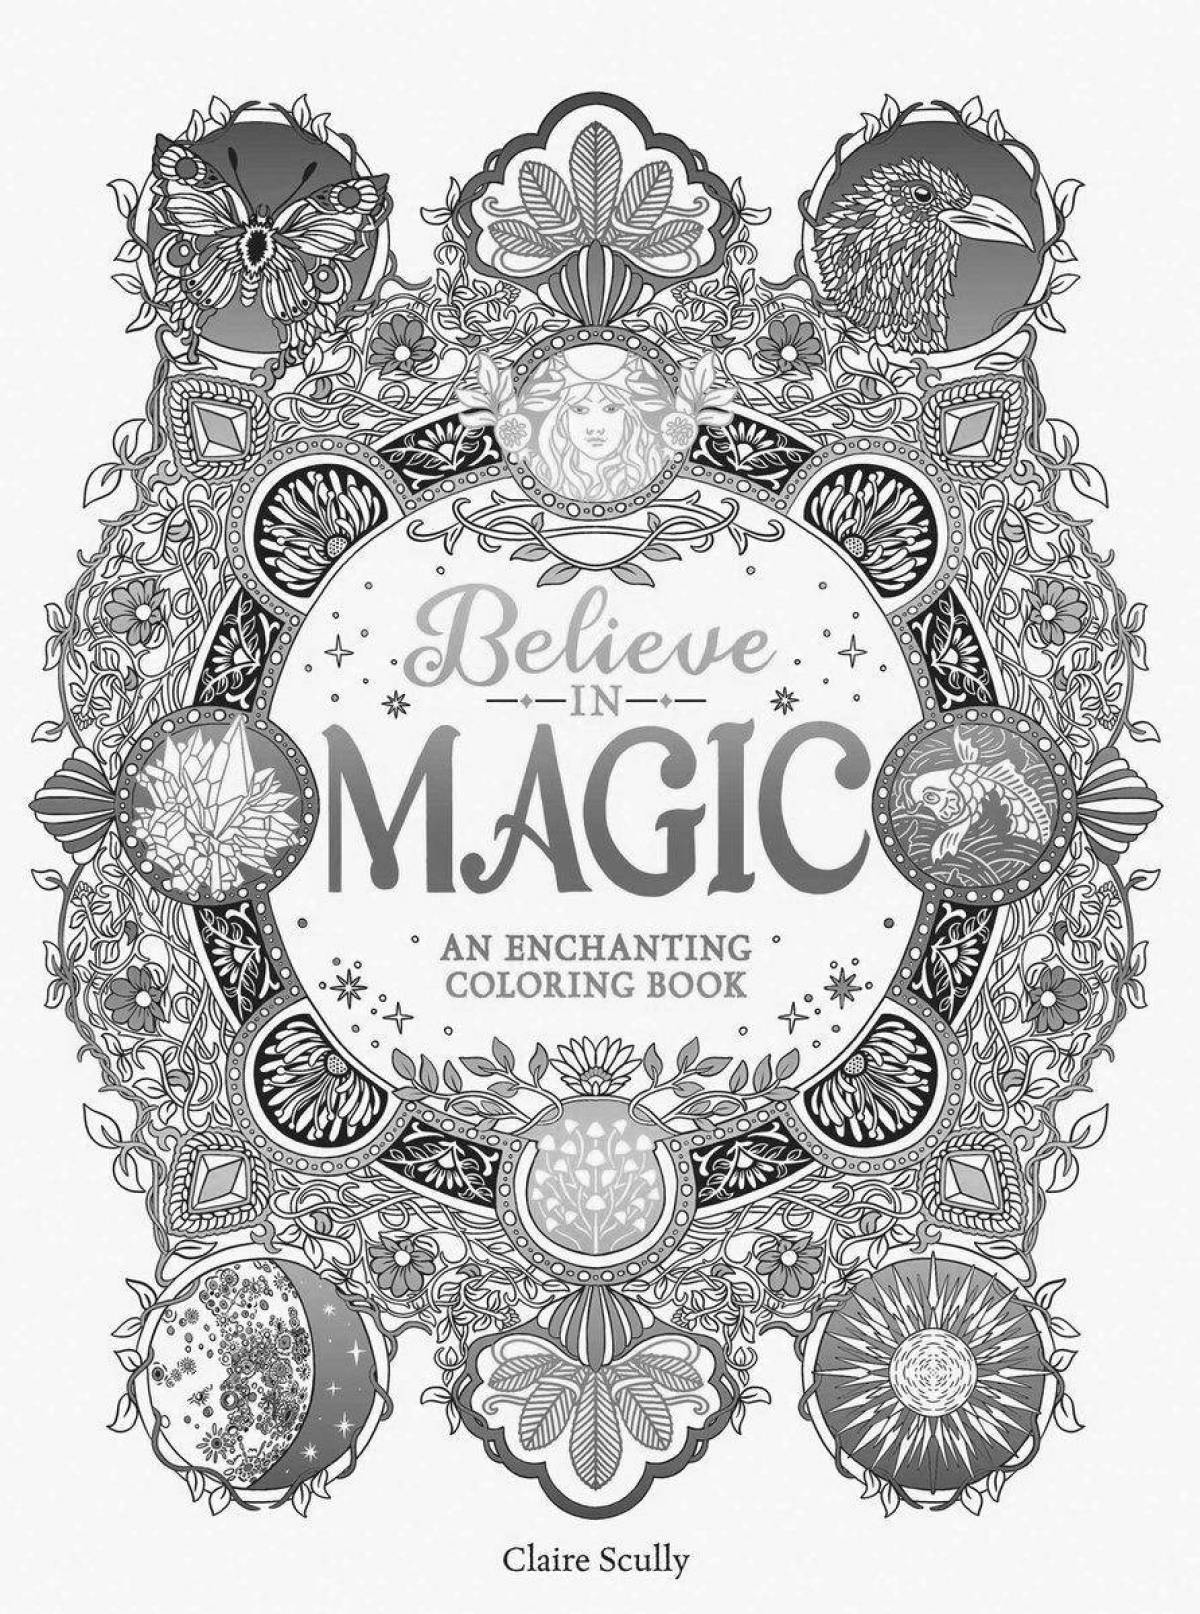 Exquisite coloring inside magic magic by claire scully